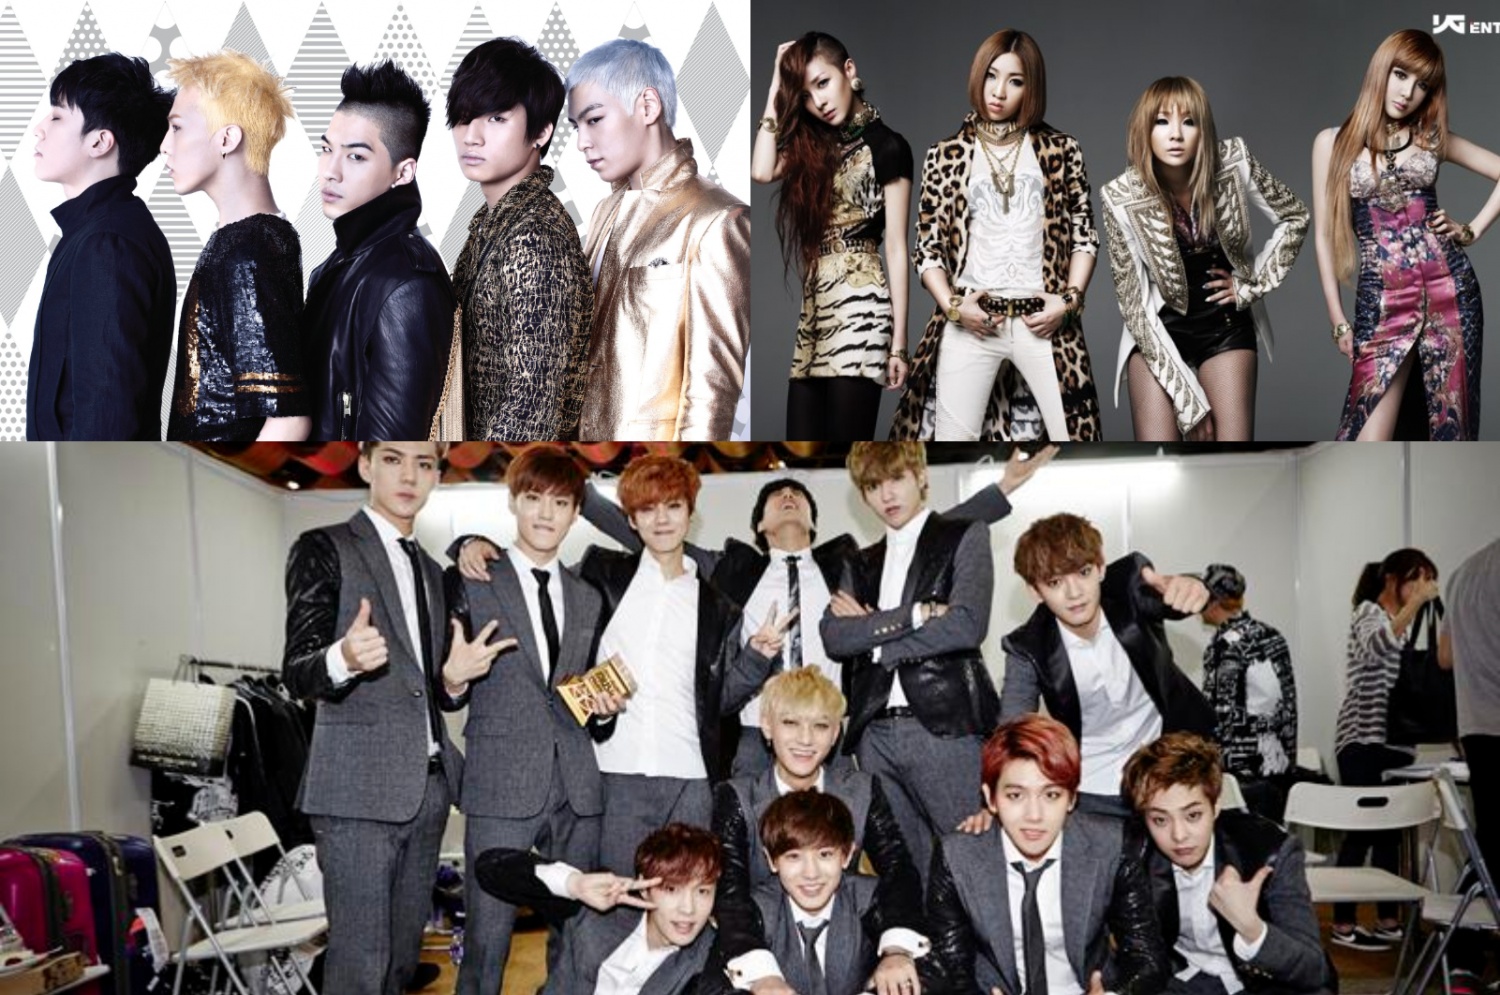 Image - BIGBANG, 2NE1, EXO, and More: Here are Some of the K-pop Songs Turning 10 Years Old This 2022